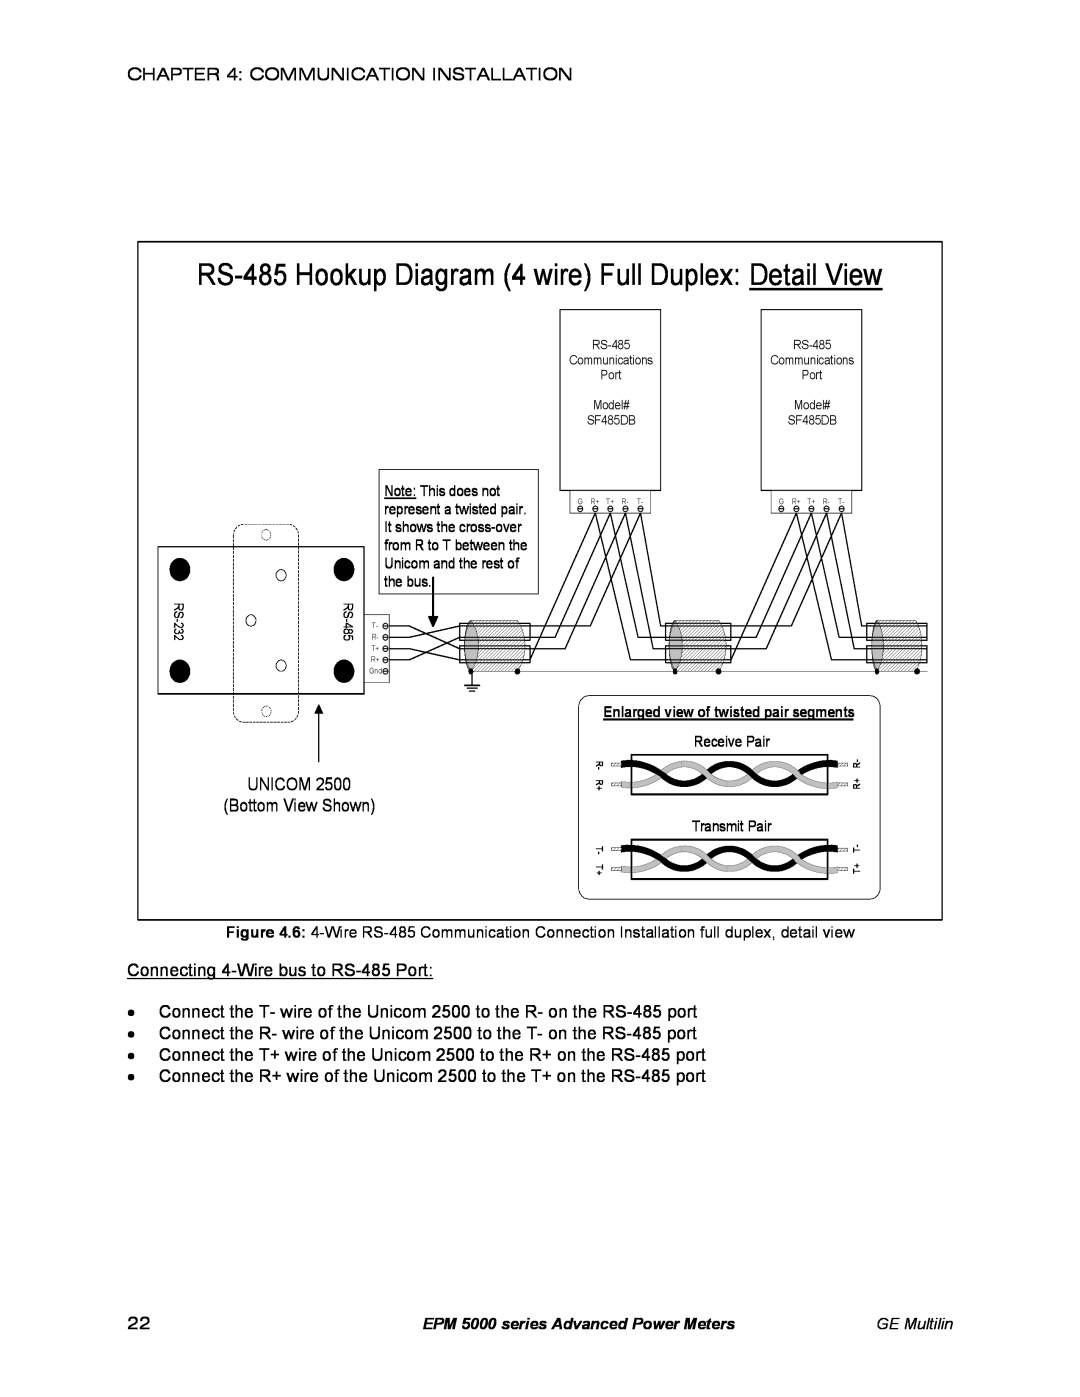 GE EPM 5350, EPM 5200 RS-485 Hookup Diagram 4 wire Full Duplex Detail View, Enlarged view of twisted pair segments 